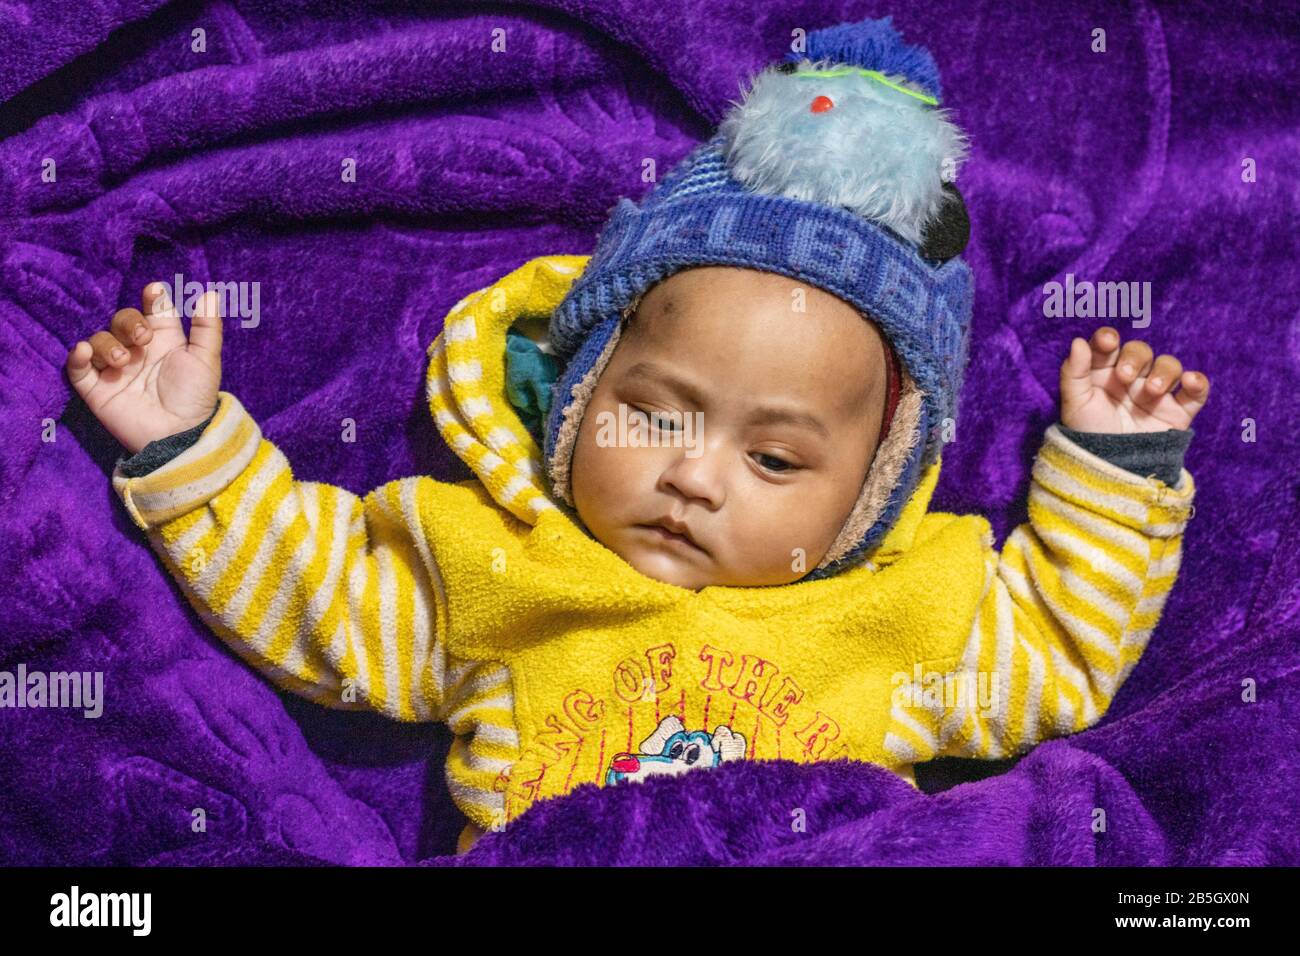 Newborn indian baby close-up on voilet blanket background Stock Photo